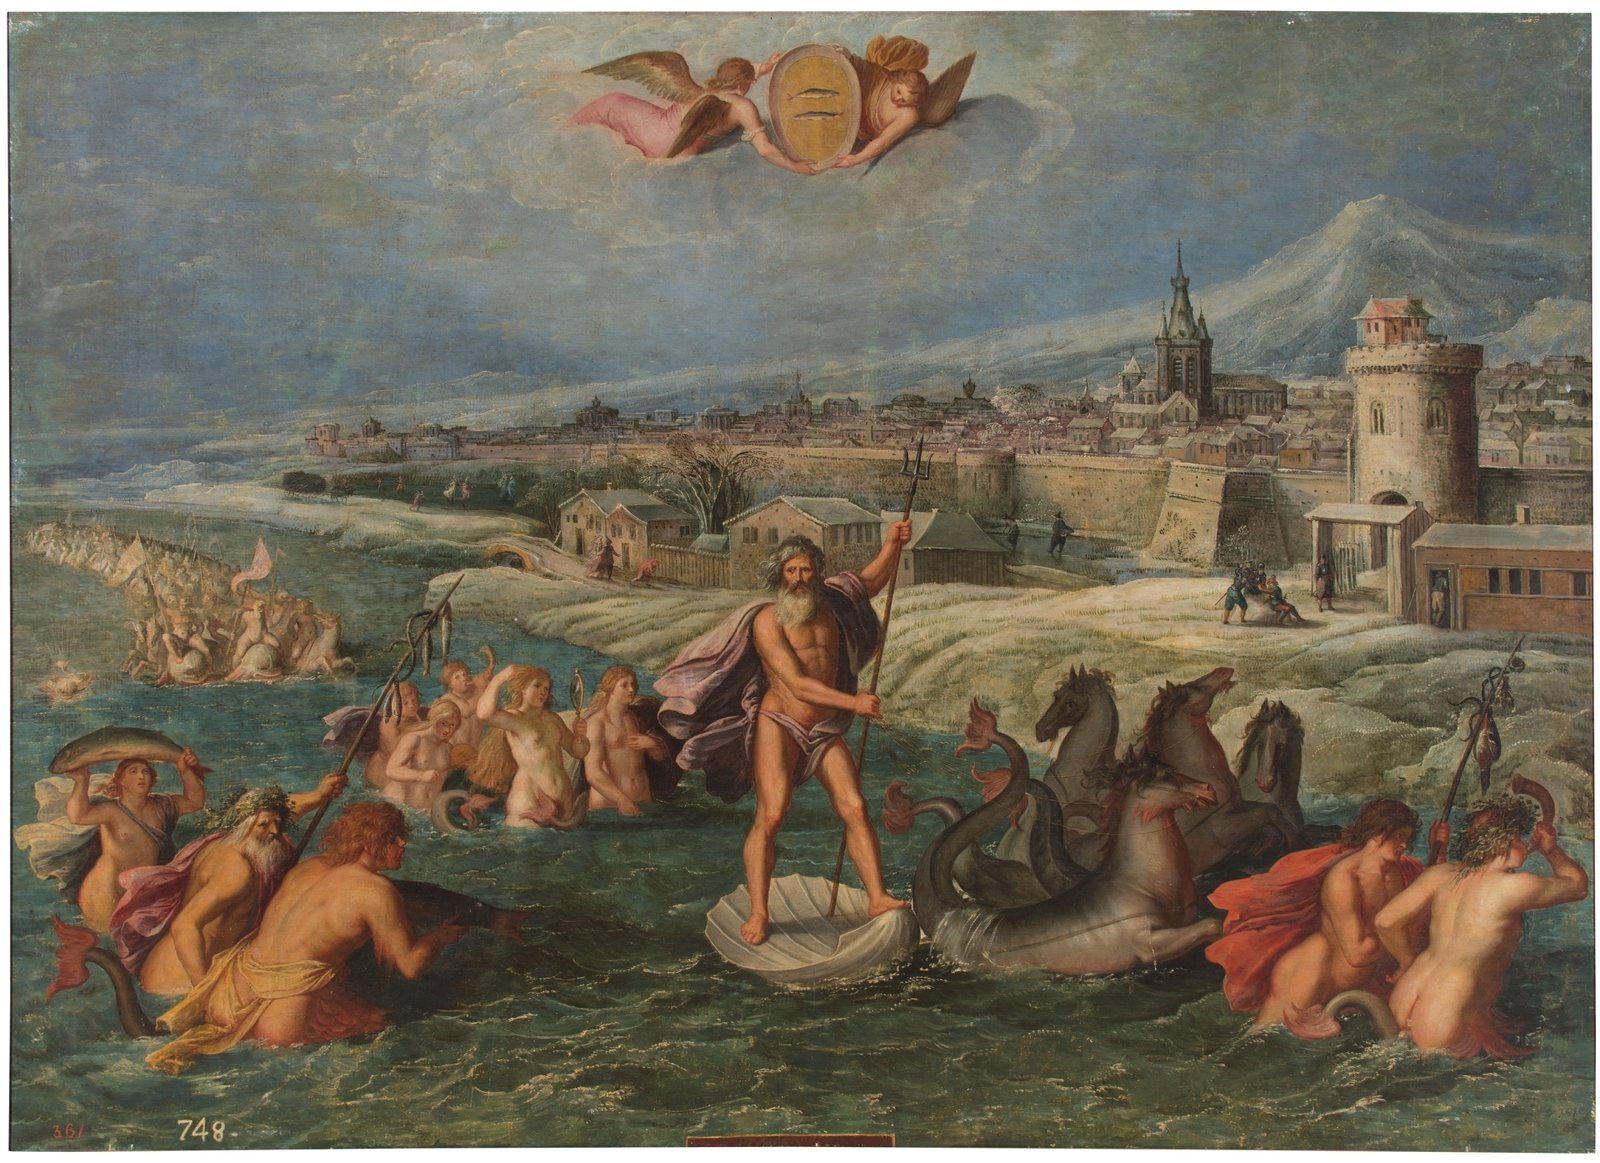 This painting represents Poseidon surrounded by maritime creatures and sea nymphs. They make their entrance onto the shore of a city.